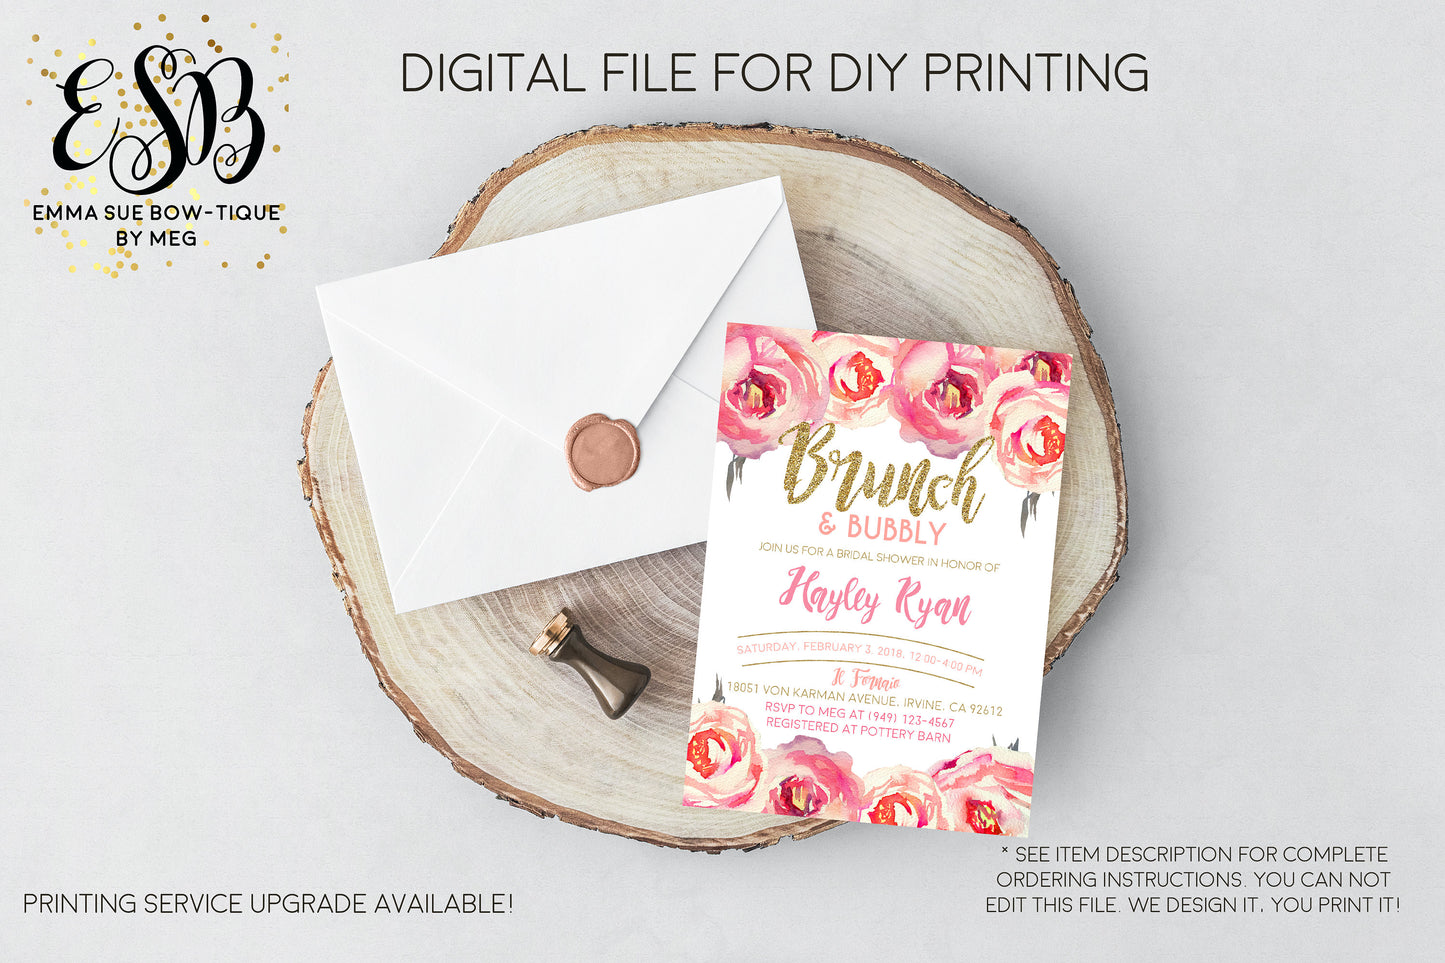 Brunch and Bubbly Invite - ANY Event - Pink and Rose Flowers with Gold Glitter - Digital File Printable (bridal-floralbrunch)